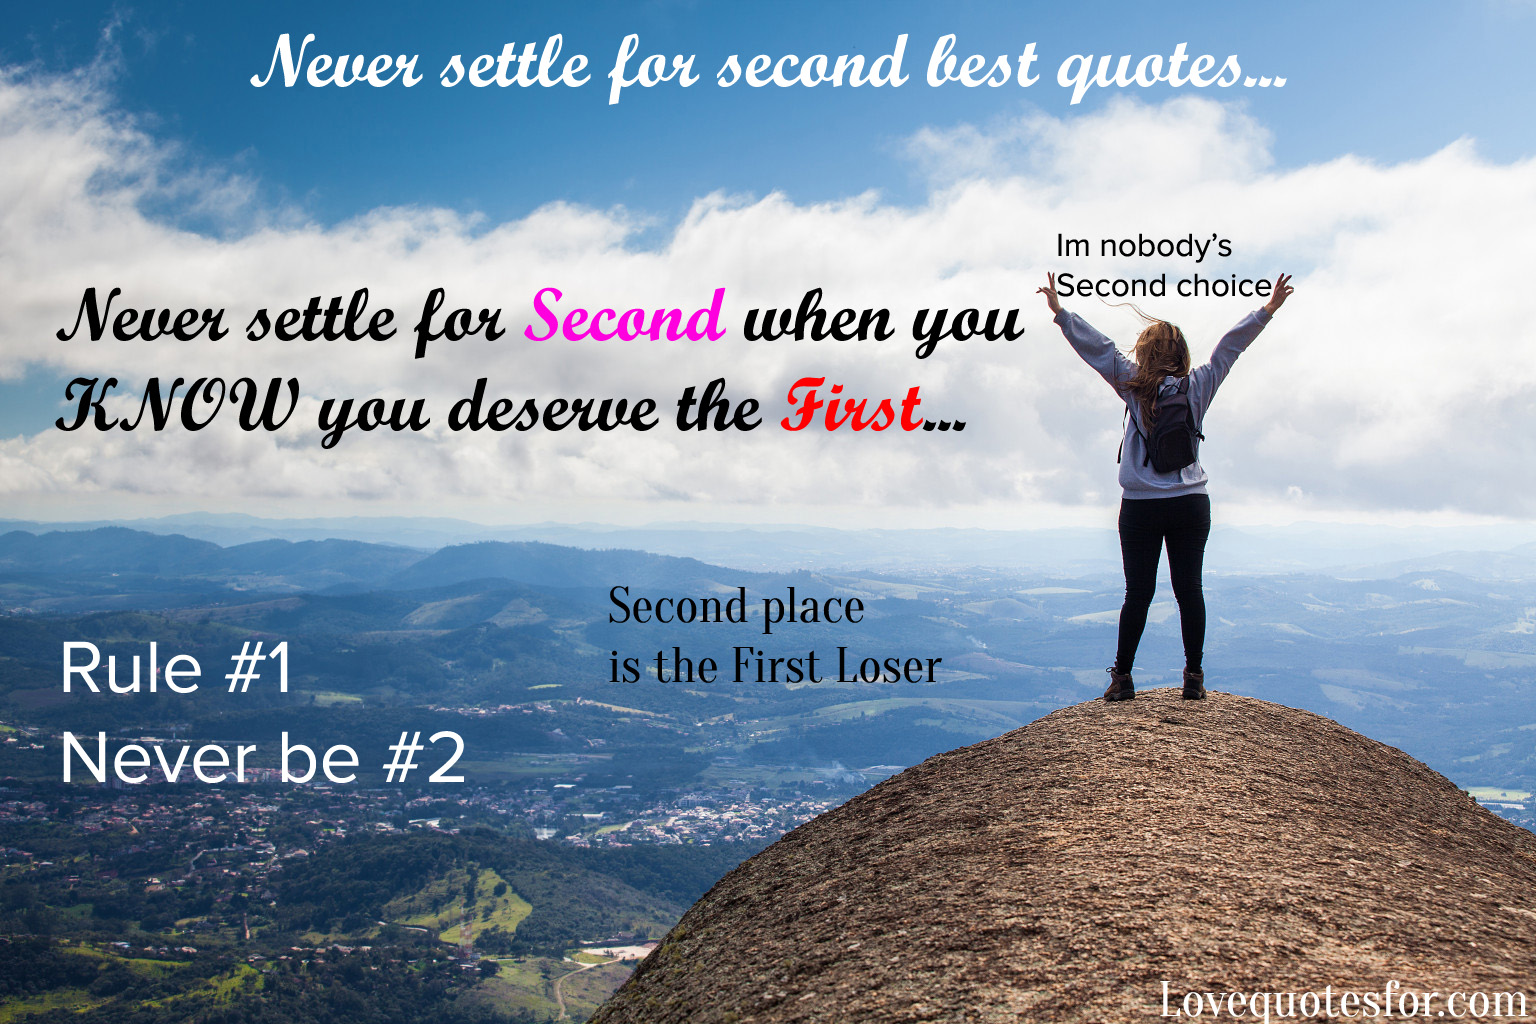 Never settle for second best quotes